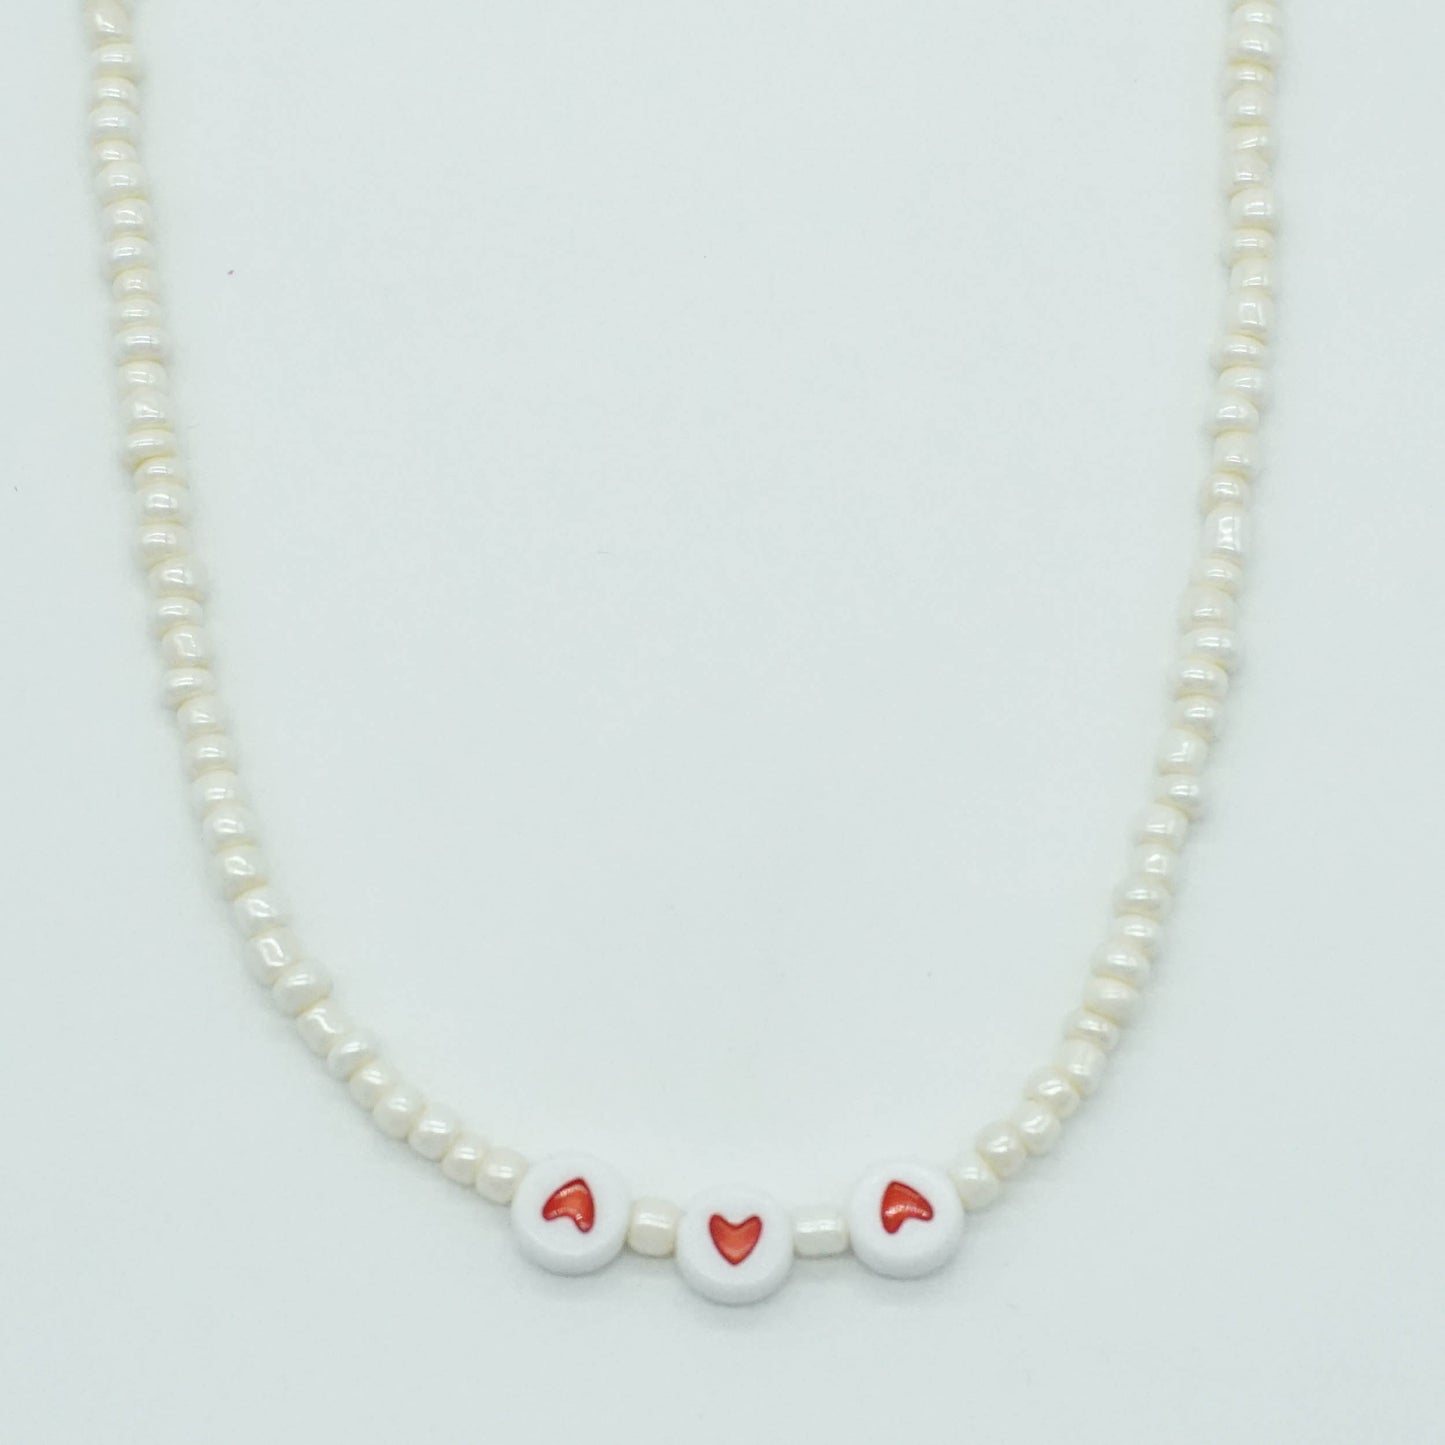 Beaded Necklace w/ Heart Beads - ALROUND